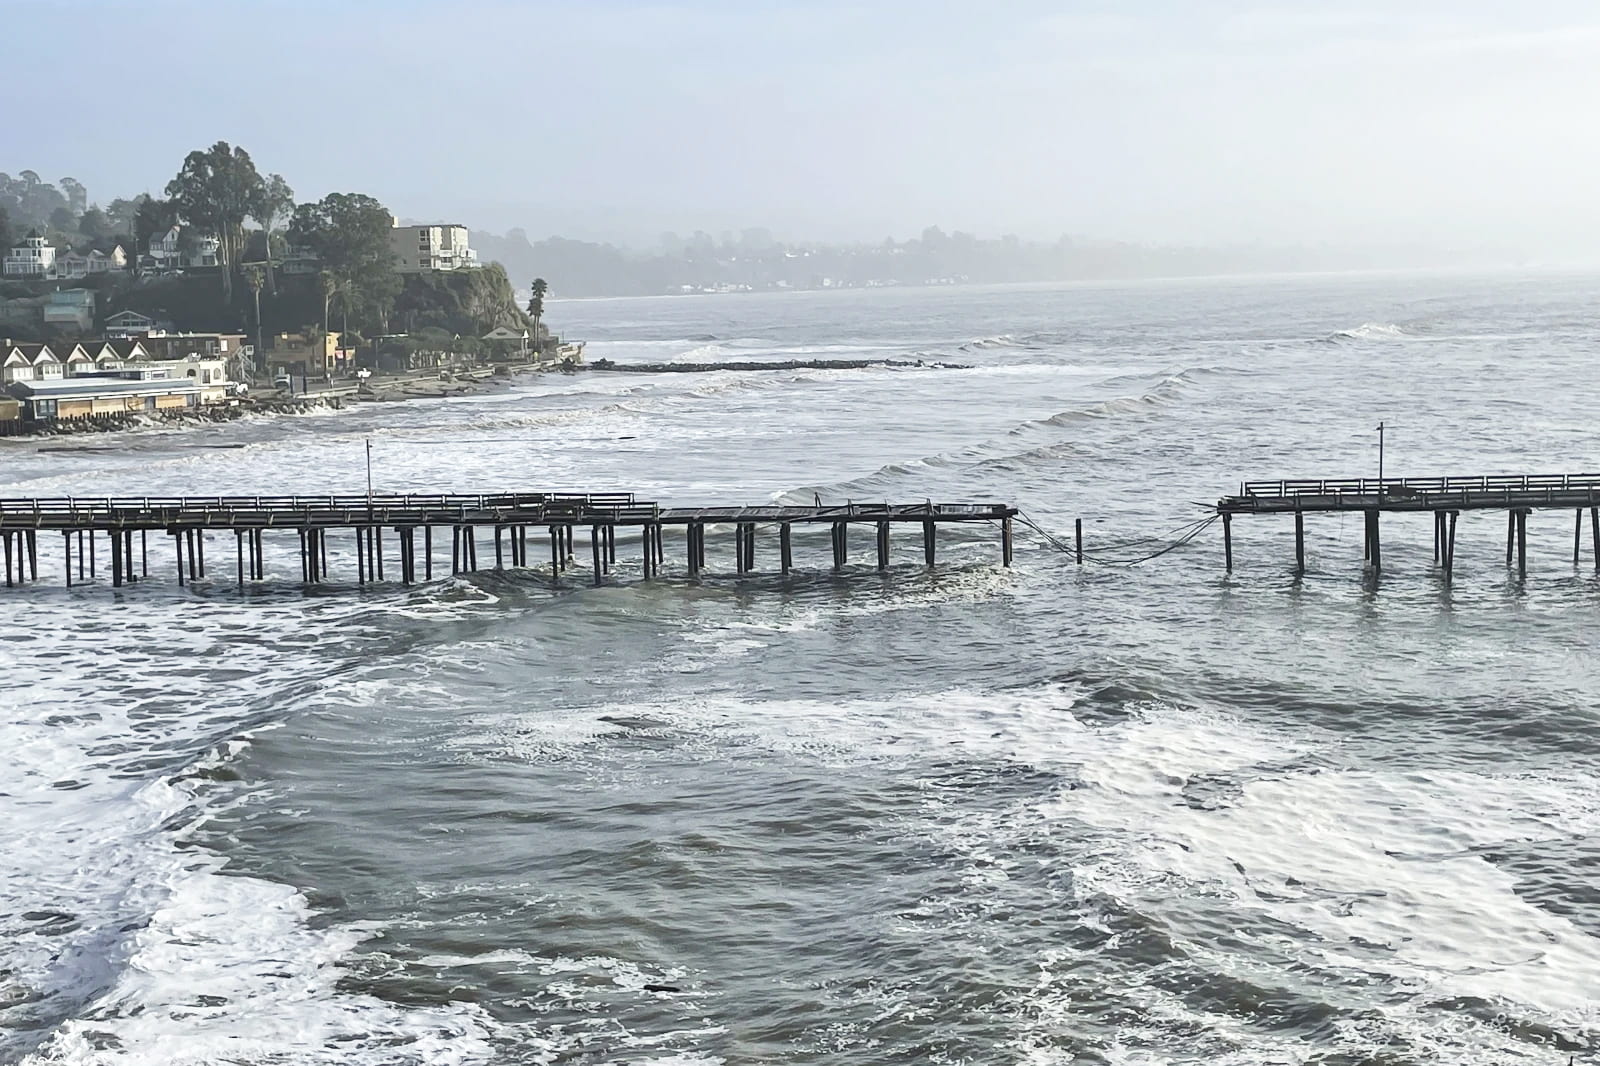 Capitola wharf with rough seas and a major section in the middle missing.